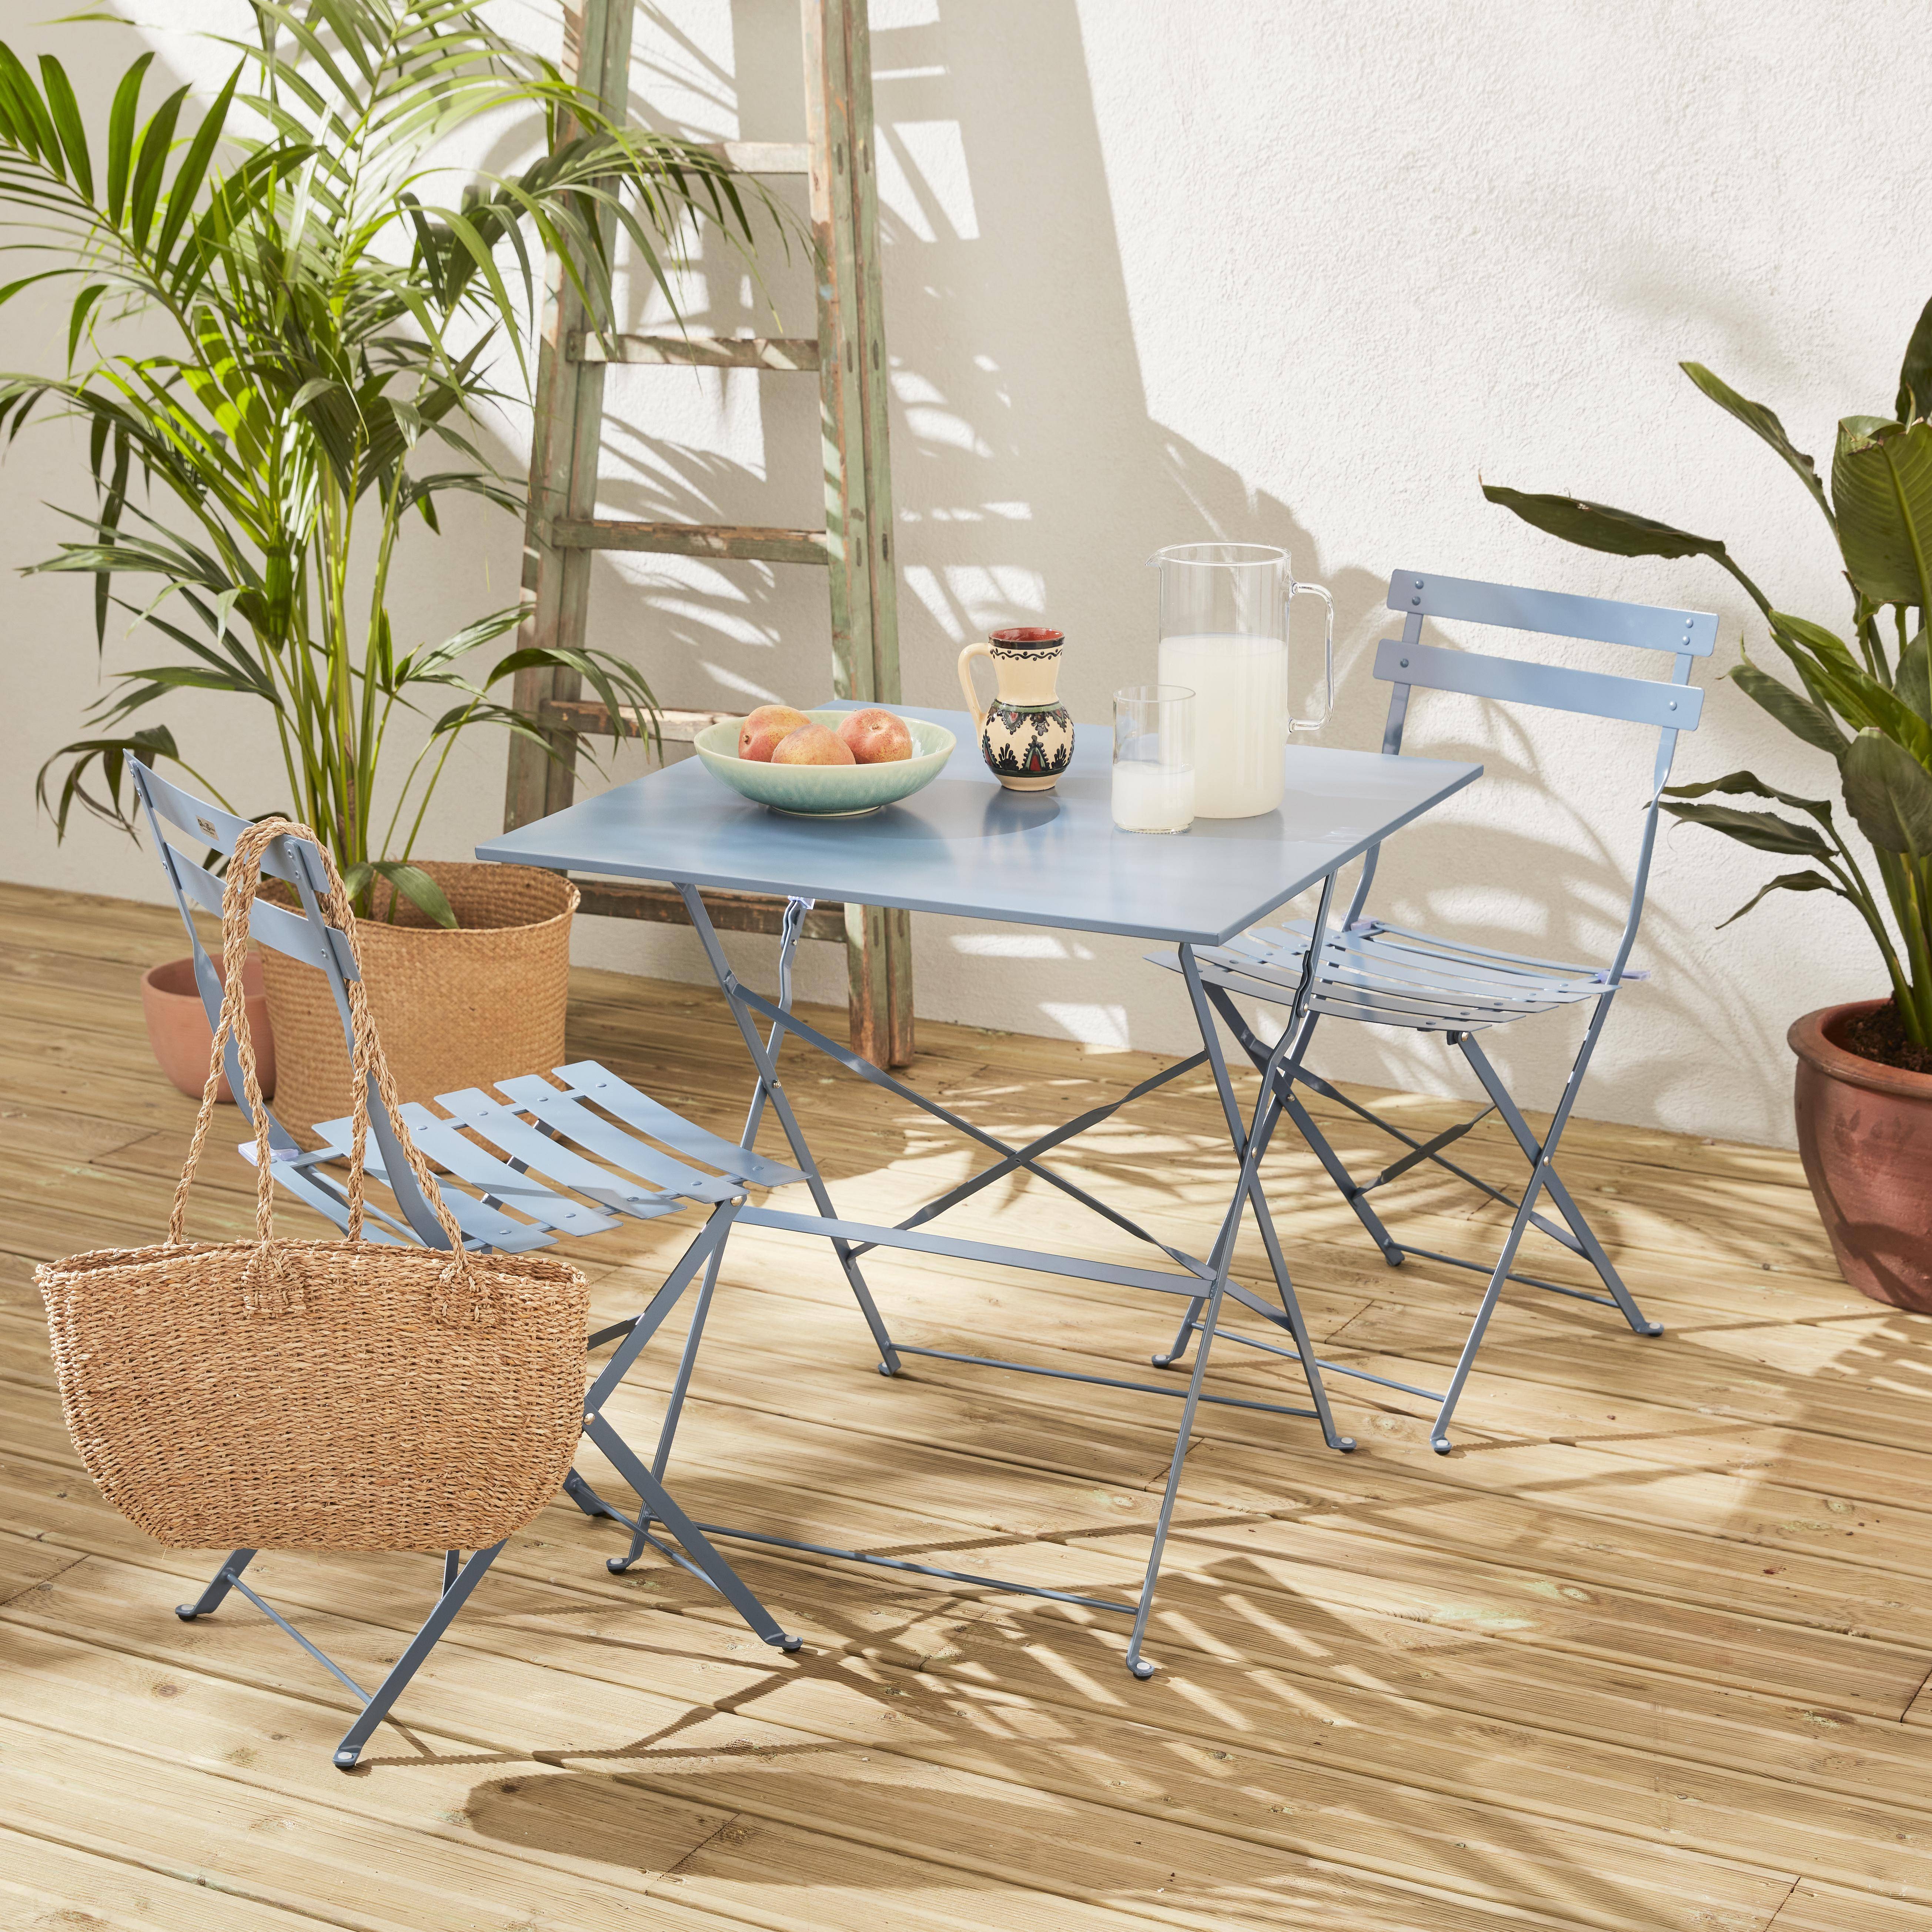 2-seater foldable thermo-lacquered steel bistro garden table with chairs, 70x70cm - Emilia - Grey Blue Photo1